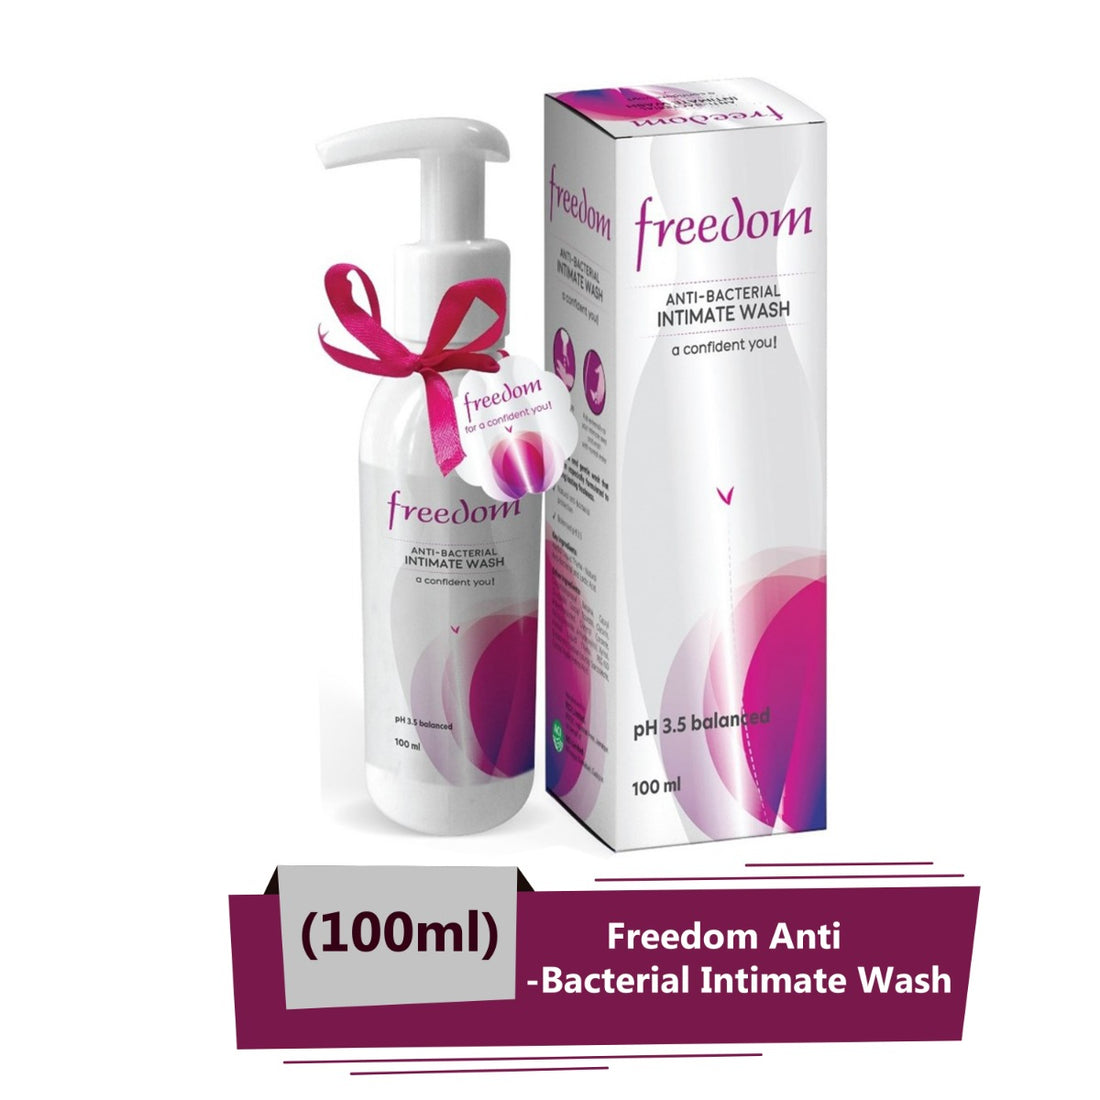 Freedom Anti-Bacterial Intimate Wash (100ml)